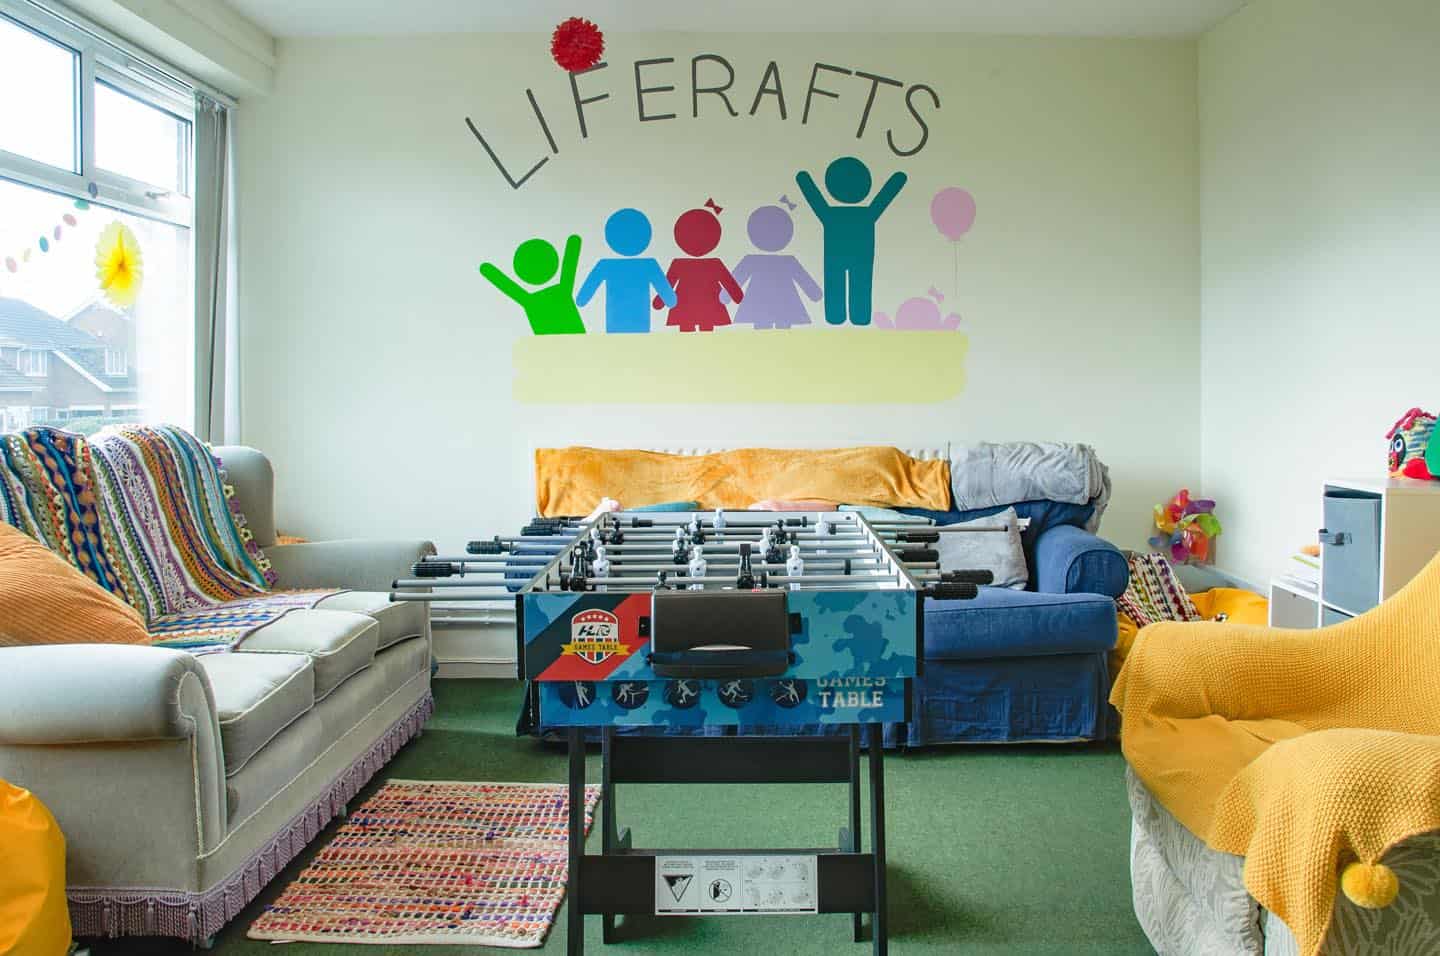 A colourful room used to host a support group for children whose family members have or have had cancer. There's a table football table in the middle of the room and it's surrounded by comfortable sofas, colourful rugs and toys for children of all ages.